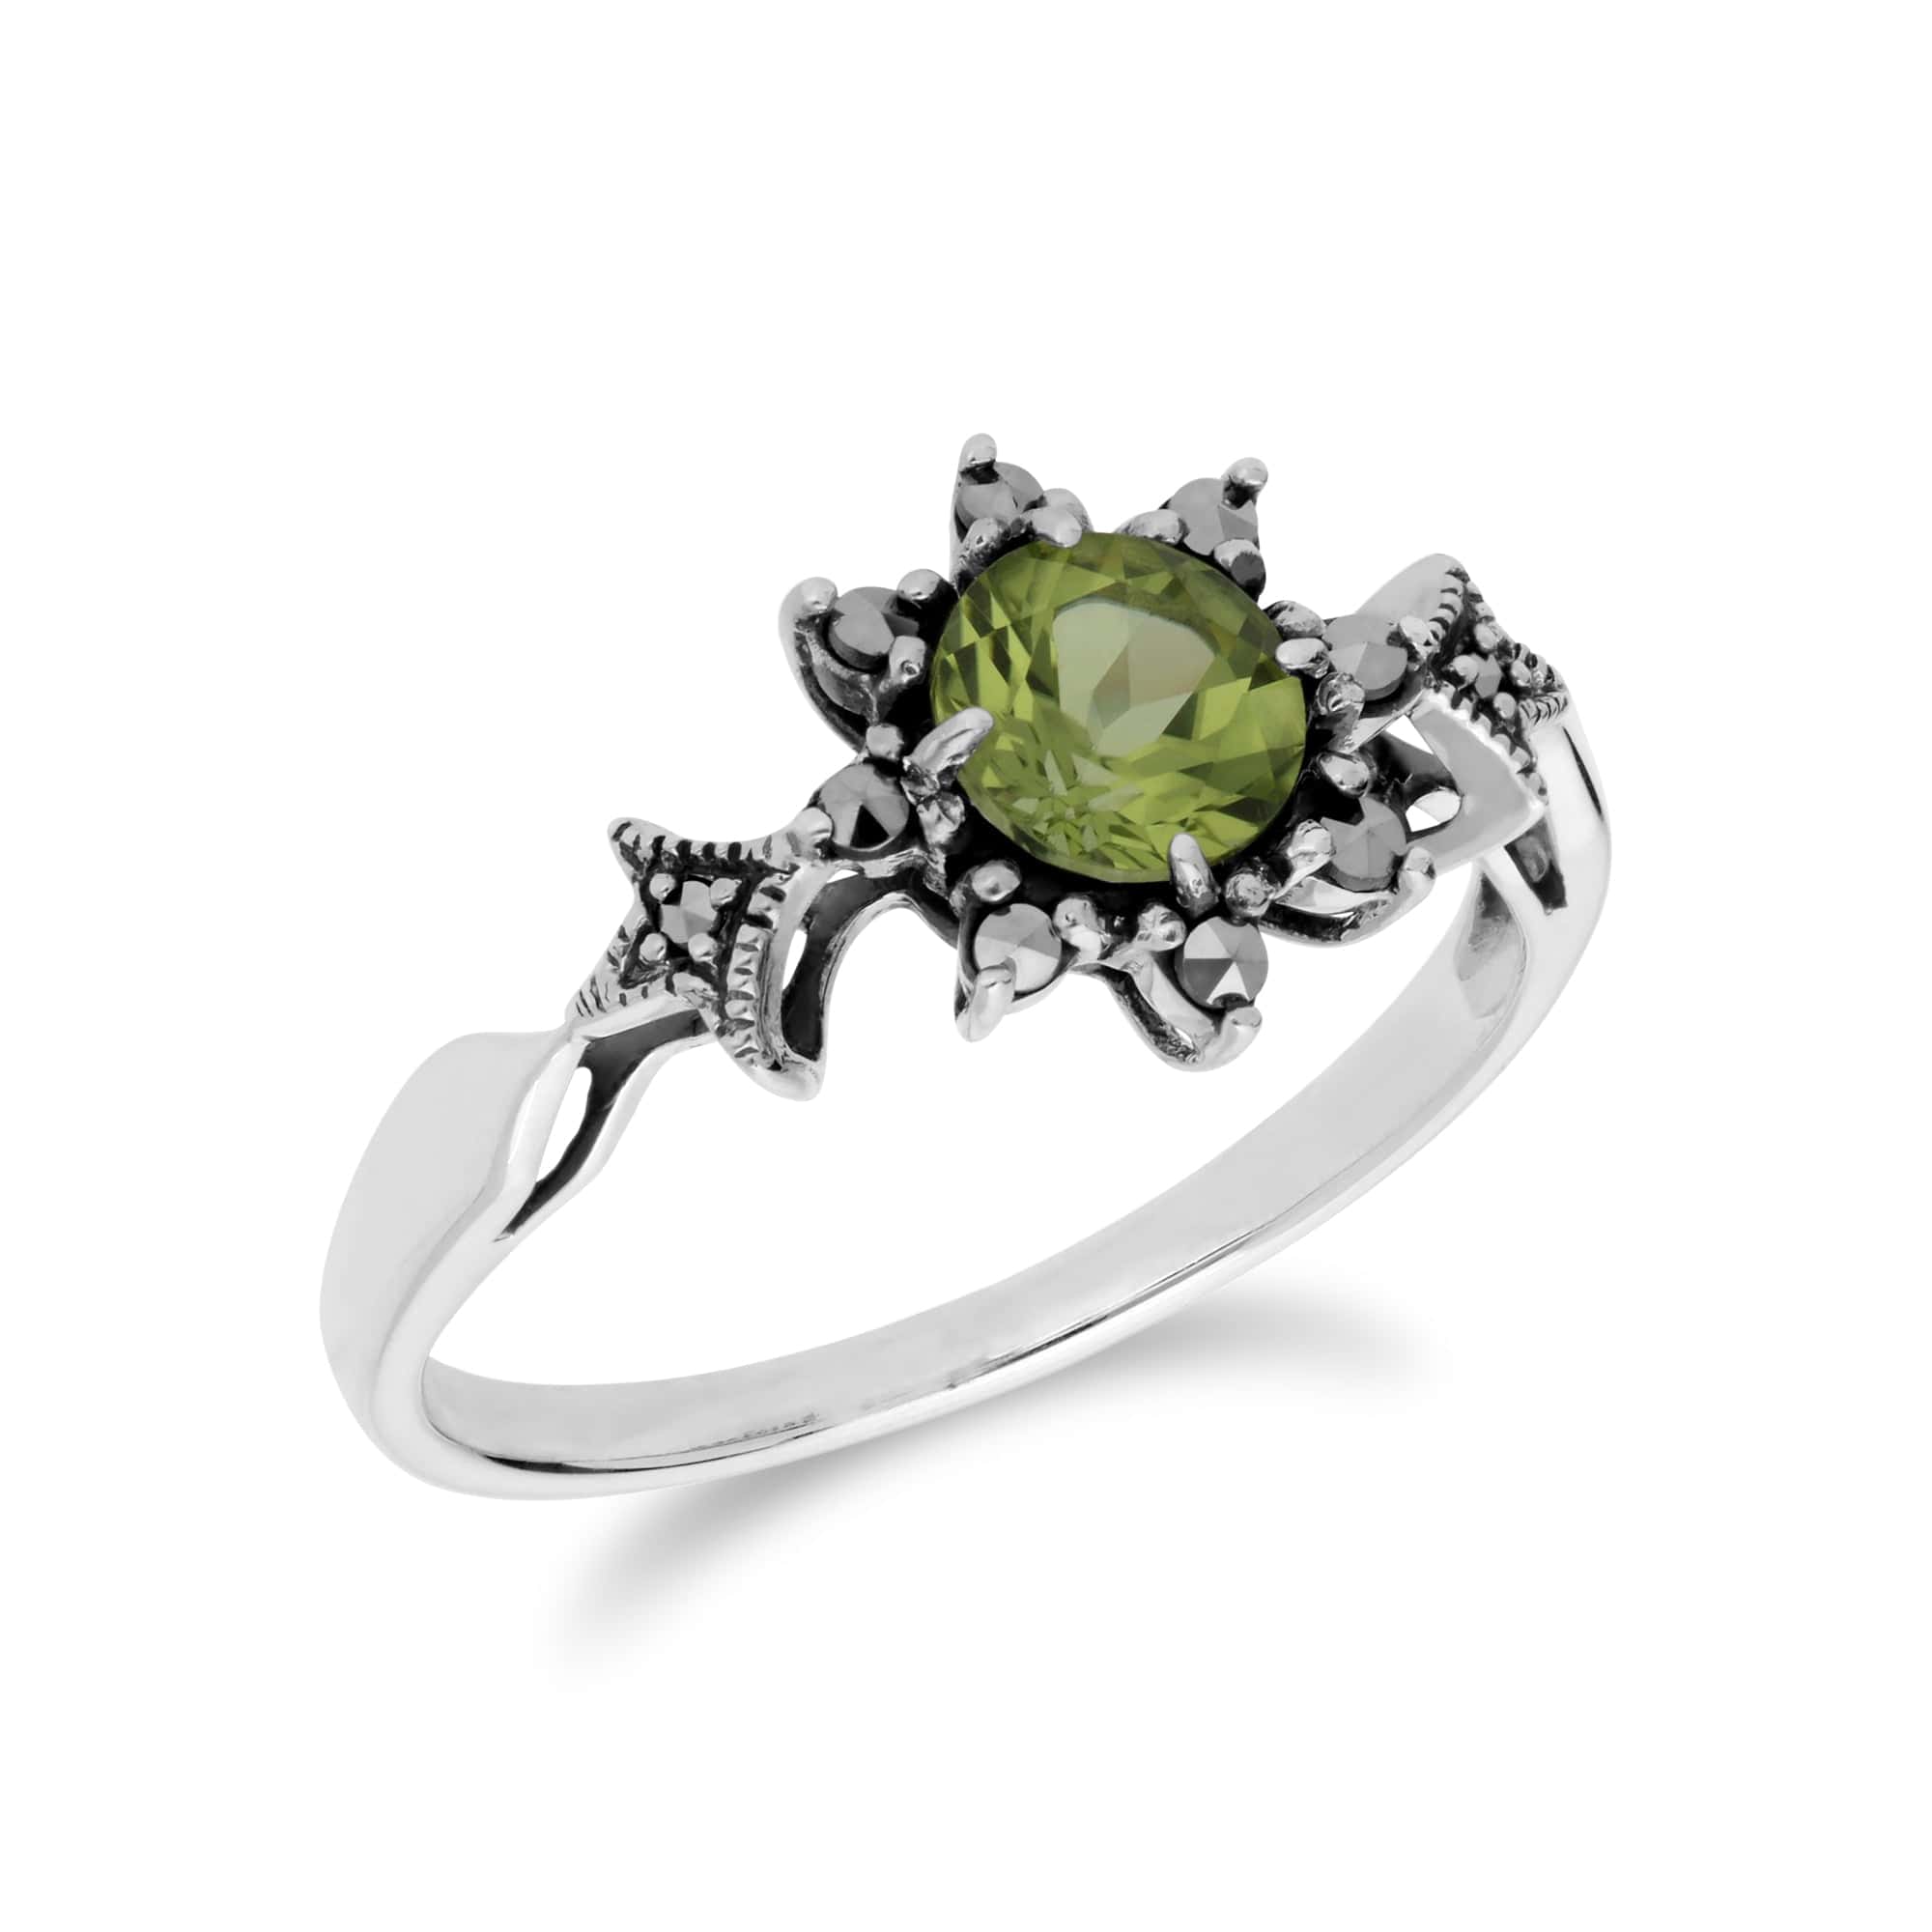 Art Deco Style Round Peridot & Marcasite Floral Ring in 925 Sterling Silver - Gemondo